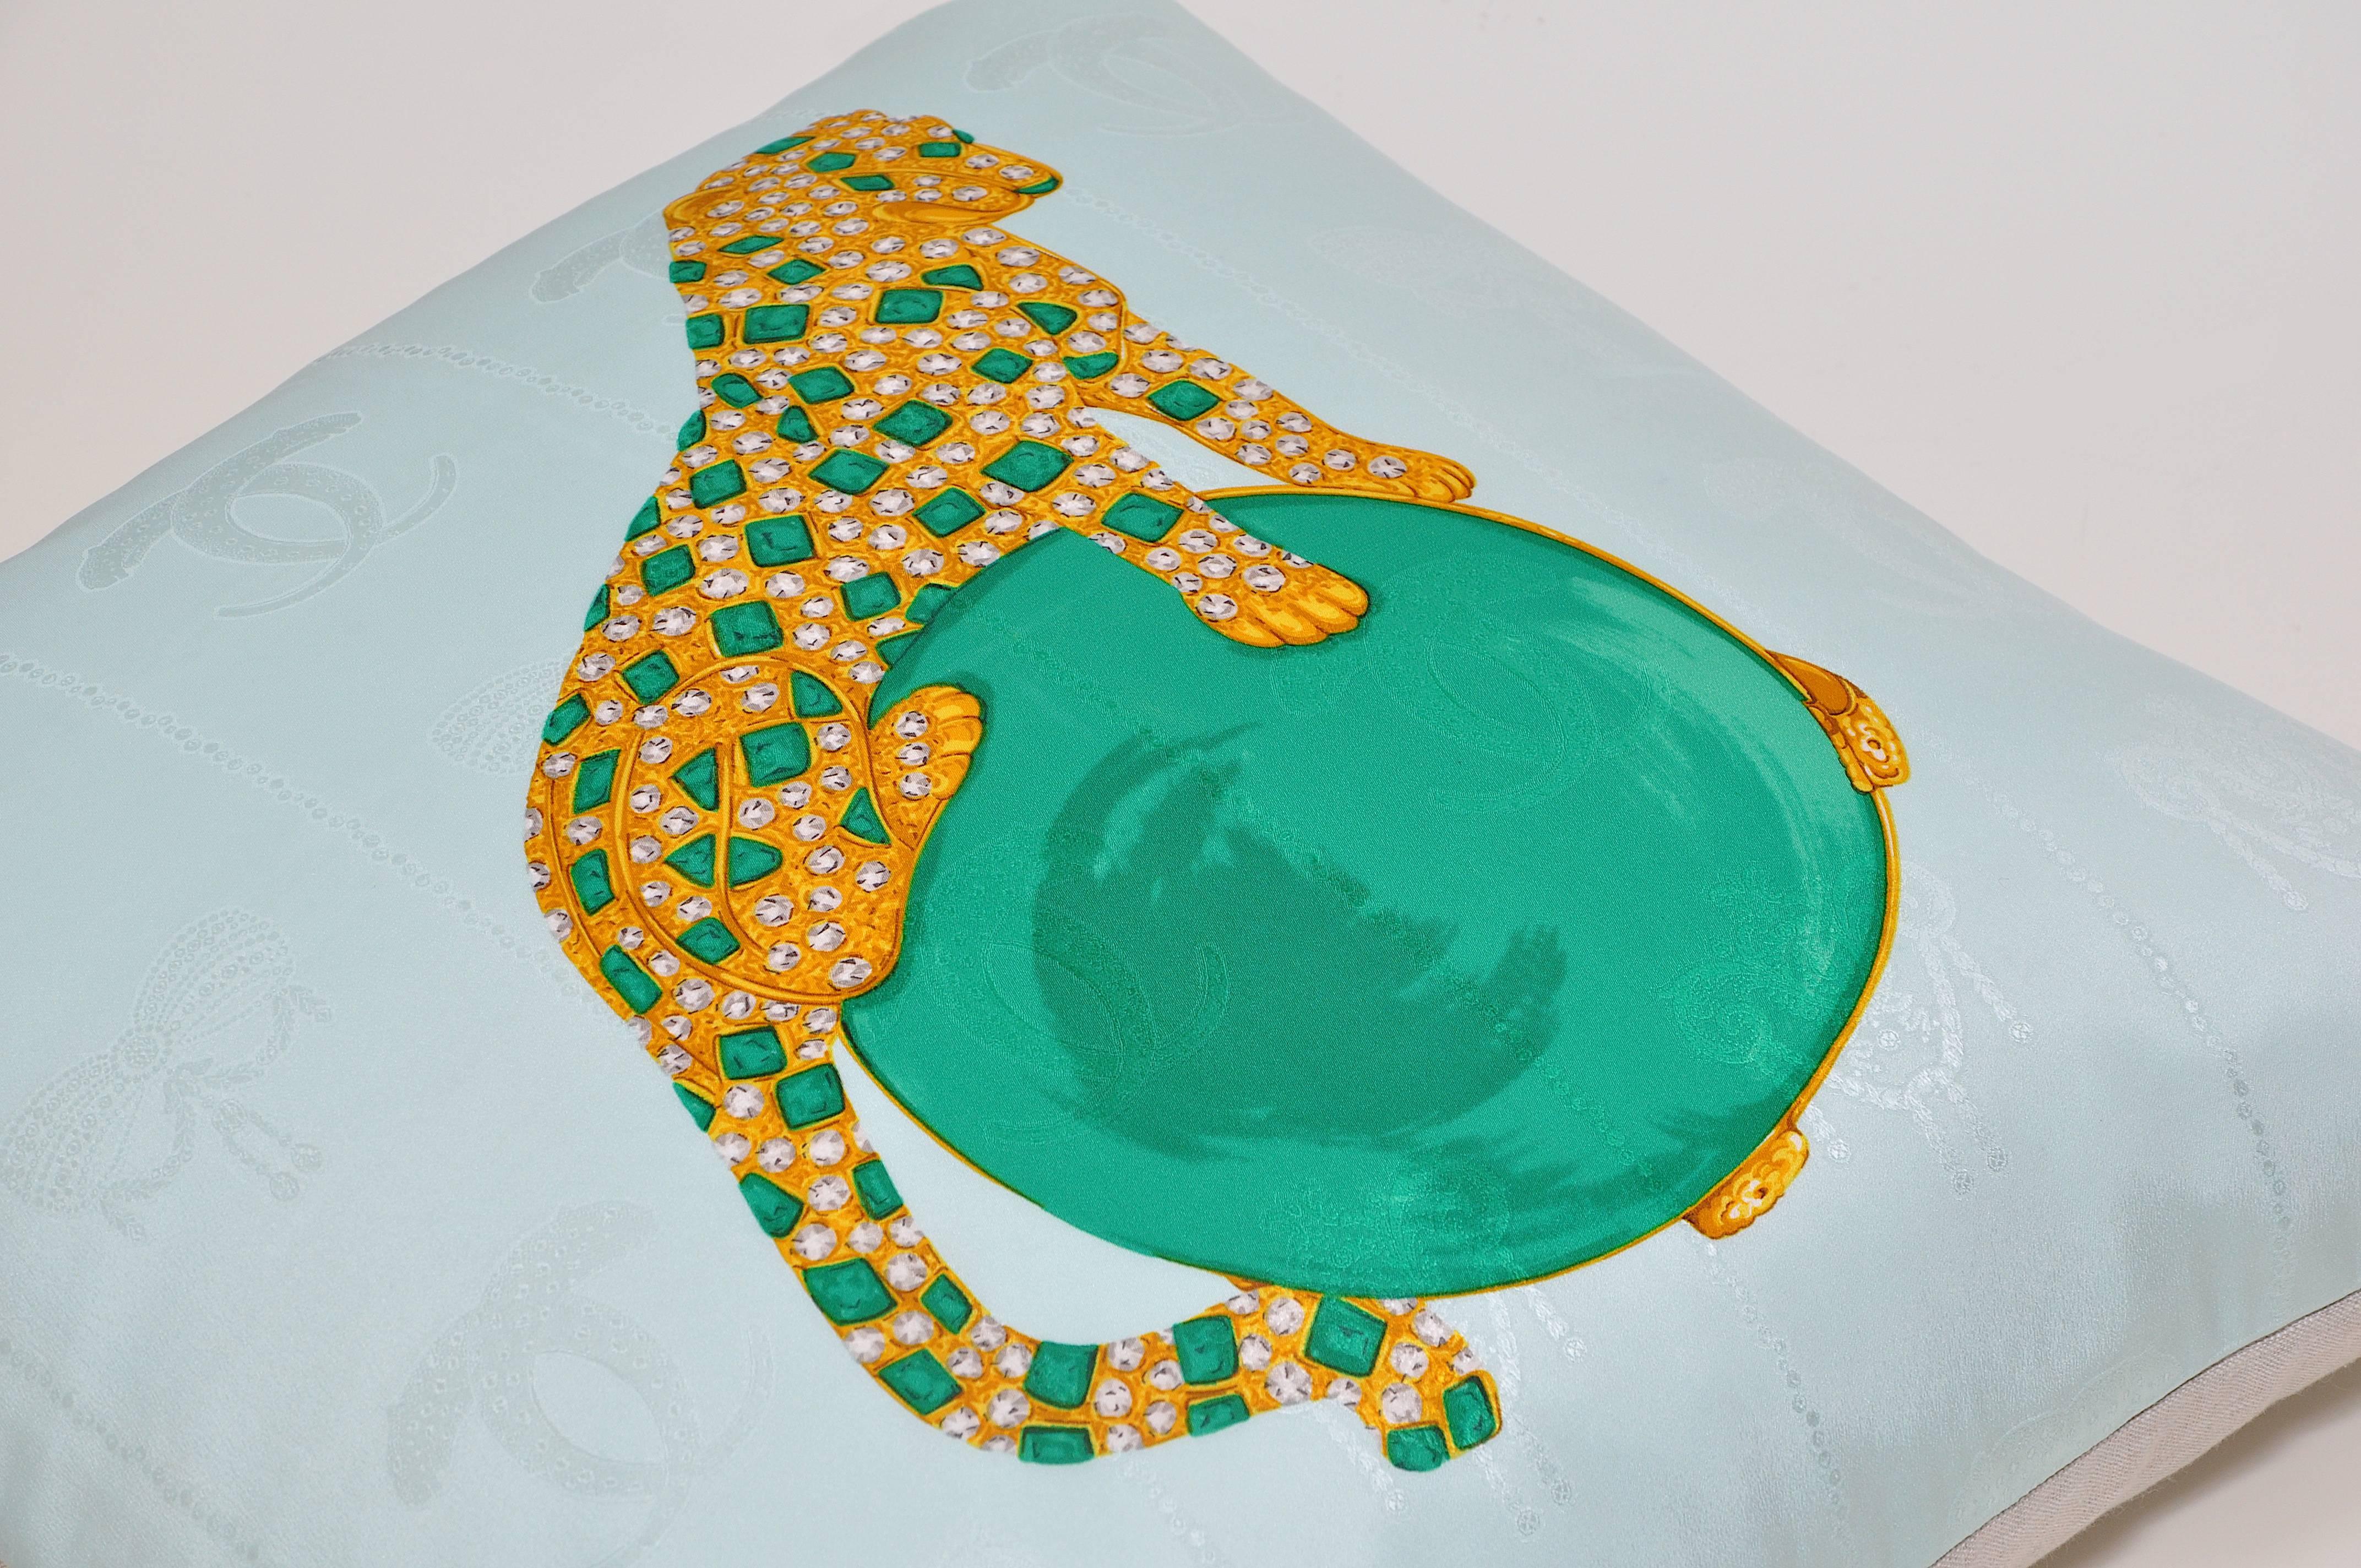 Pair of Turquoise Blue Vintage Cartier Panther Jewelry Brooch Silk Scarf Pillow In Excellent Condition For Sale In Great Britain, Northern Ireland